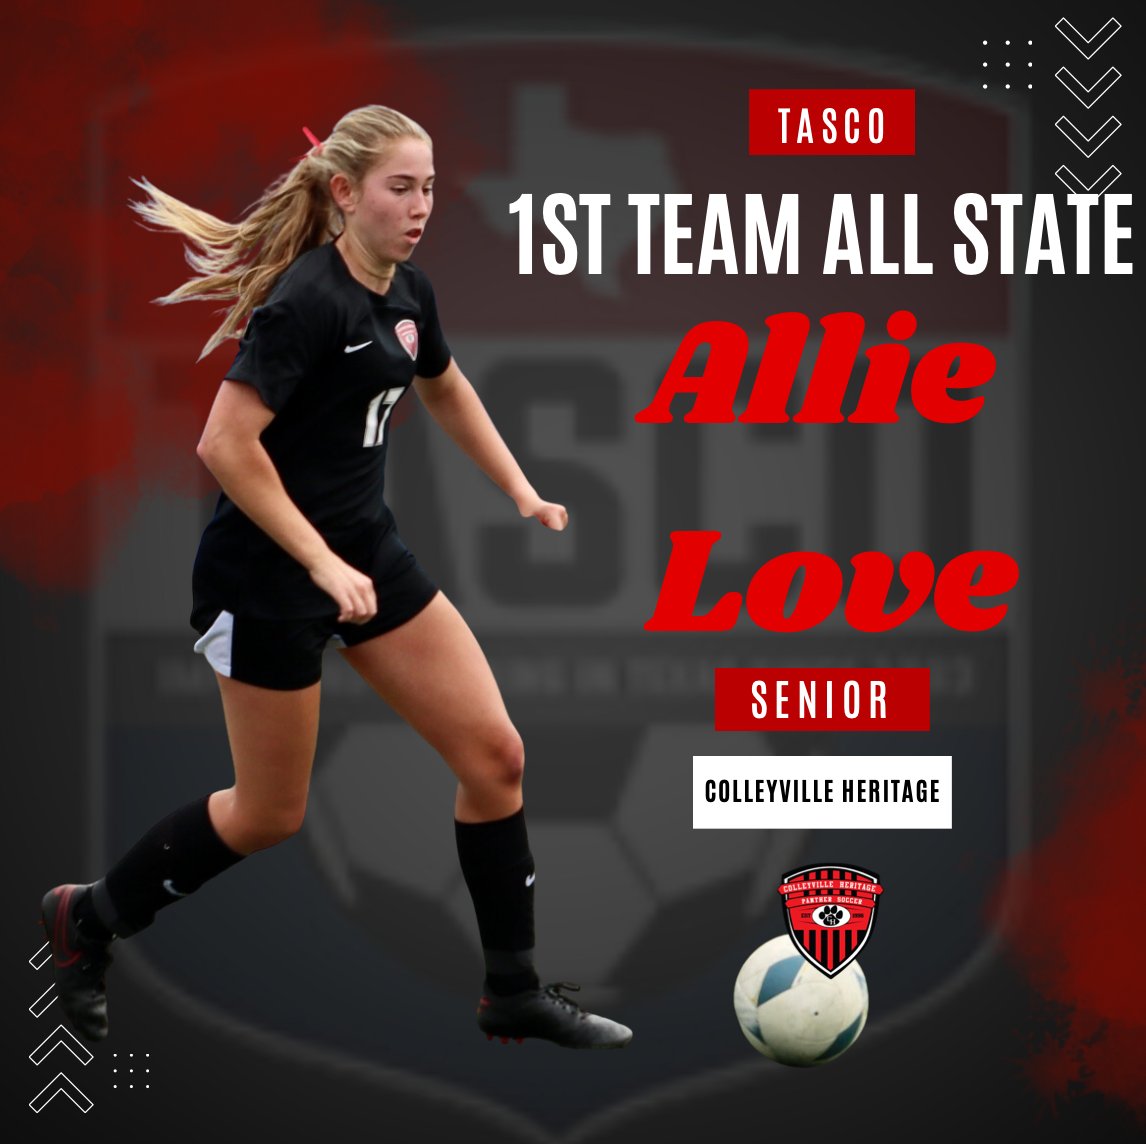 Big Congrats to Allie Love on being named TASCO 1st Team All State! #PFND